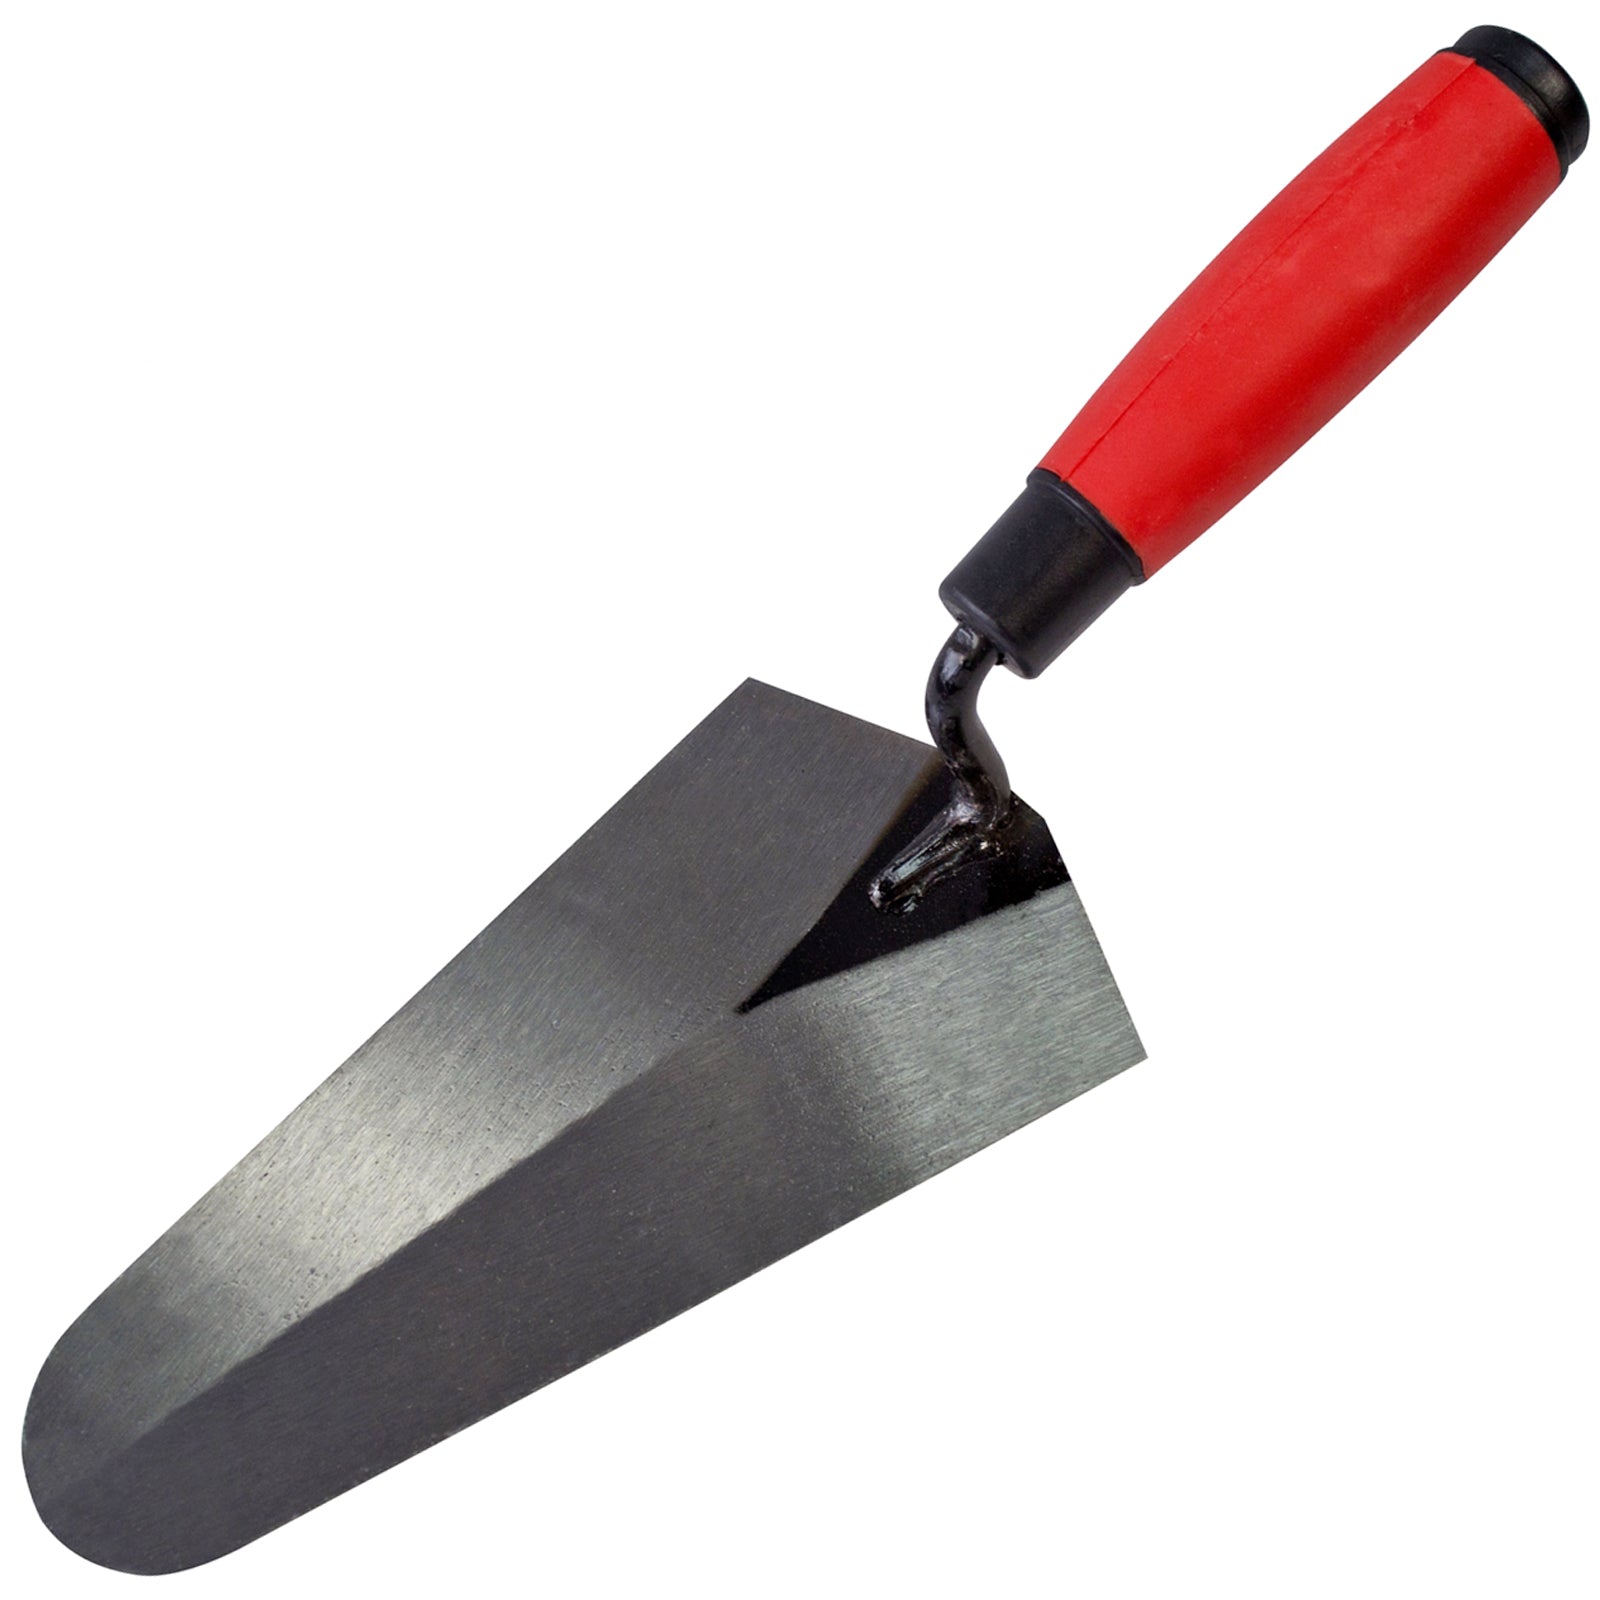 Amtech 175mm (7") Gauging Trowel with Soft Grip Handle